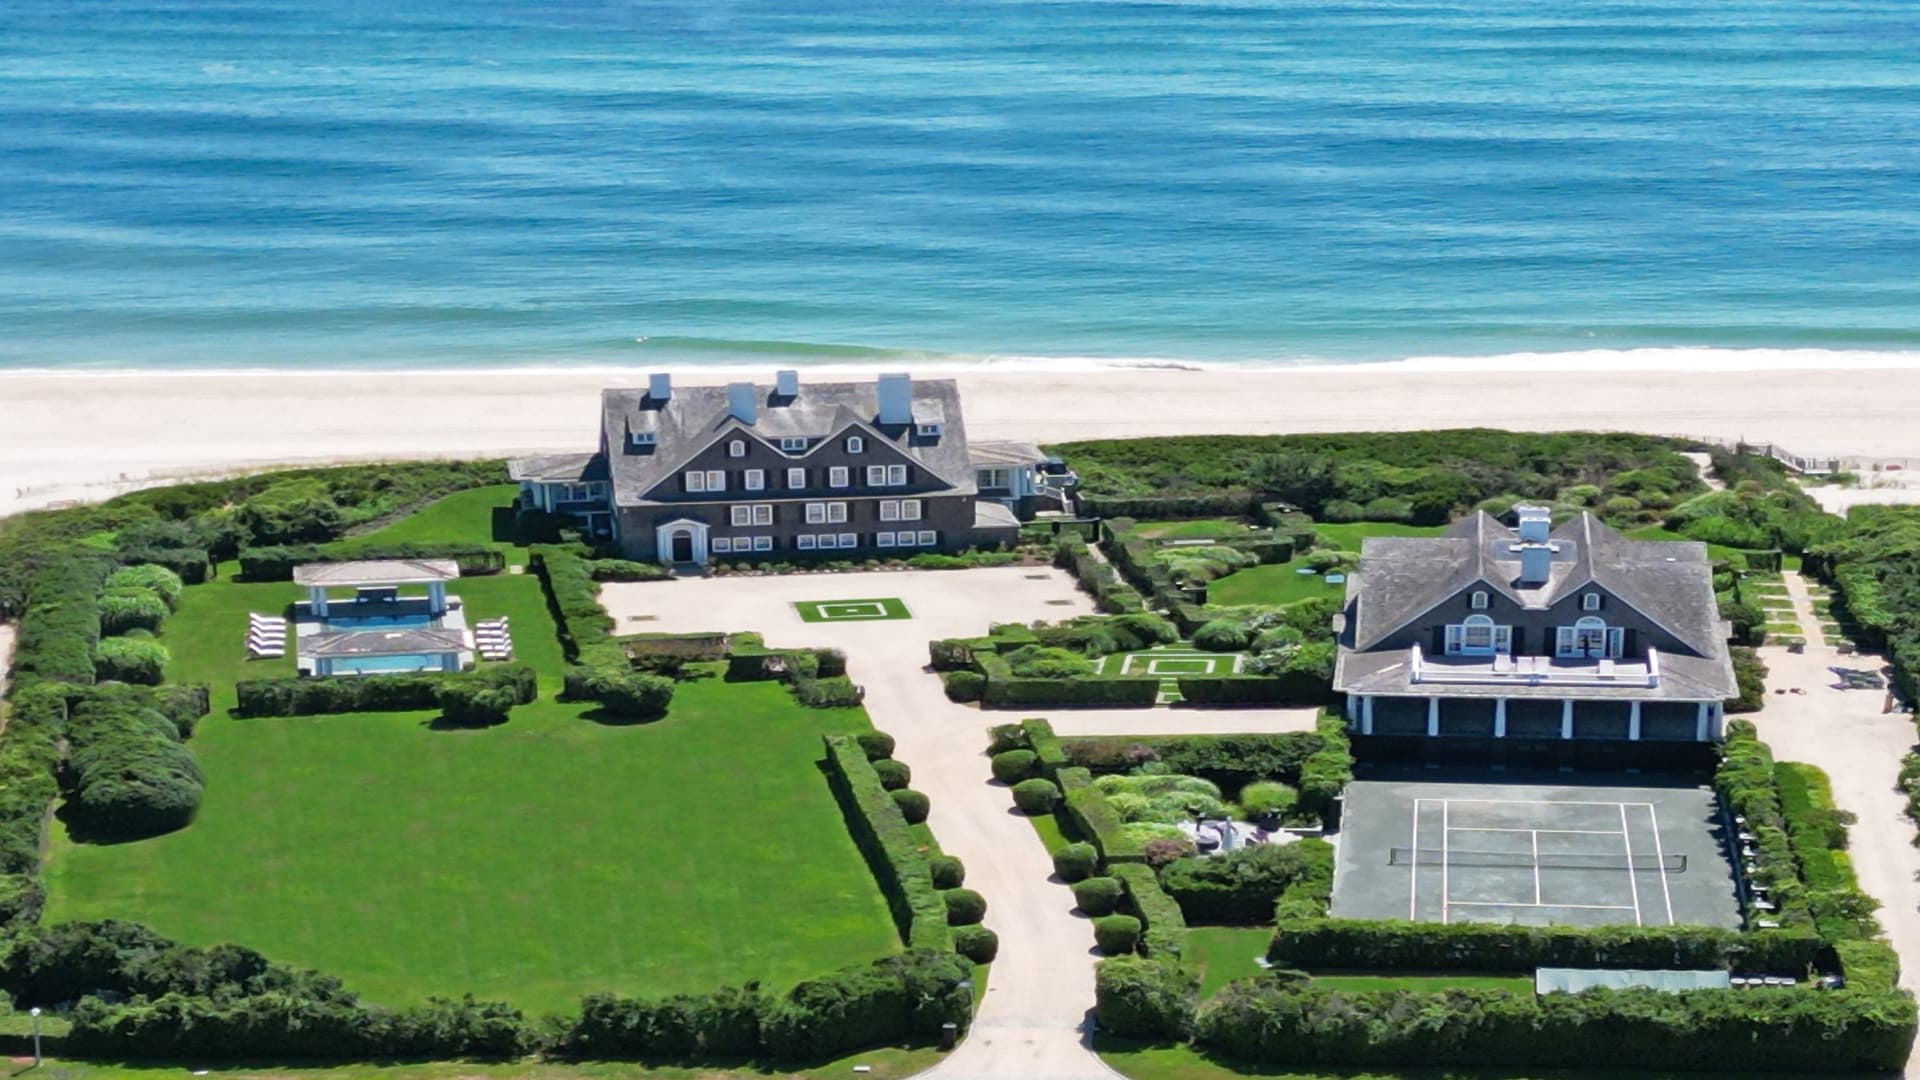 Hamptons mansion once listed for 0 million sells at auction for less than  million